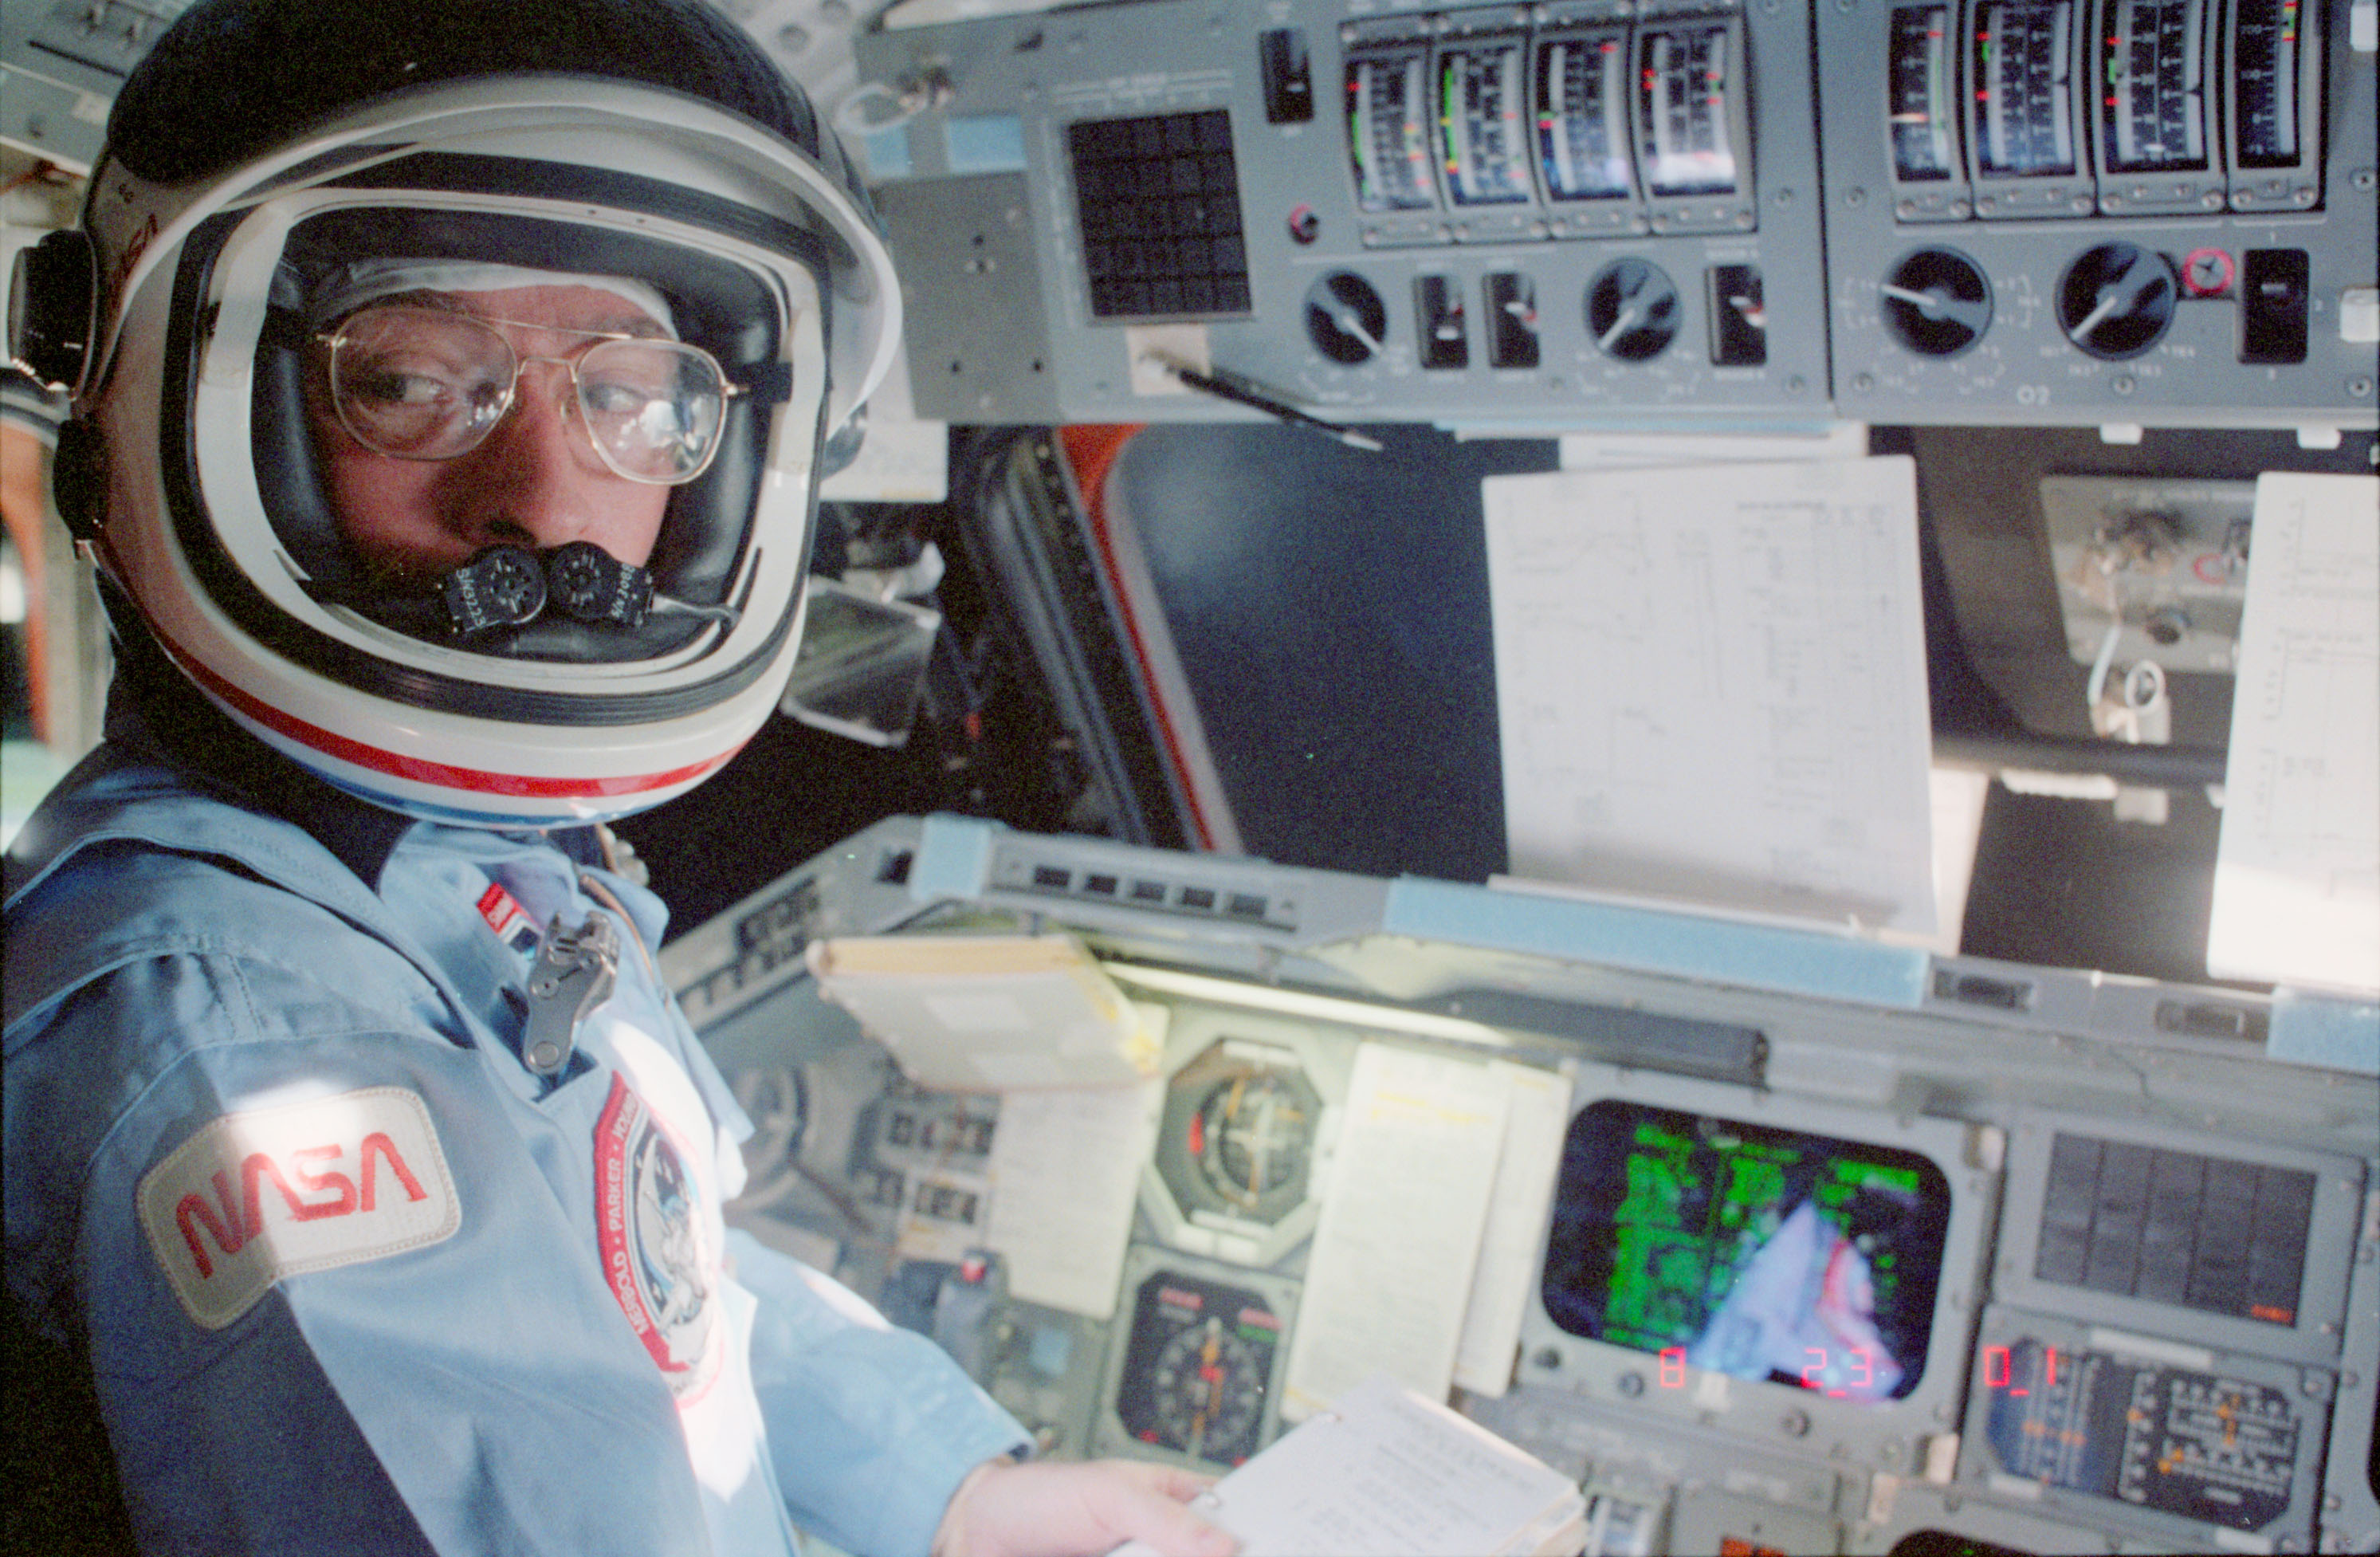 John W. Young in the shuttle commander’s seat prior to entry and landing